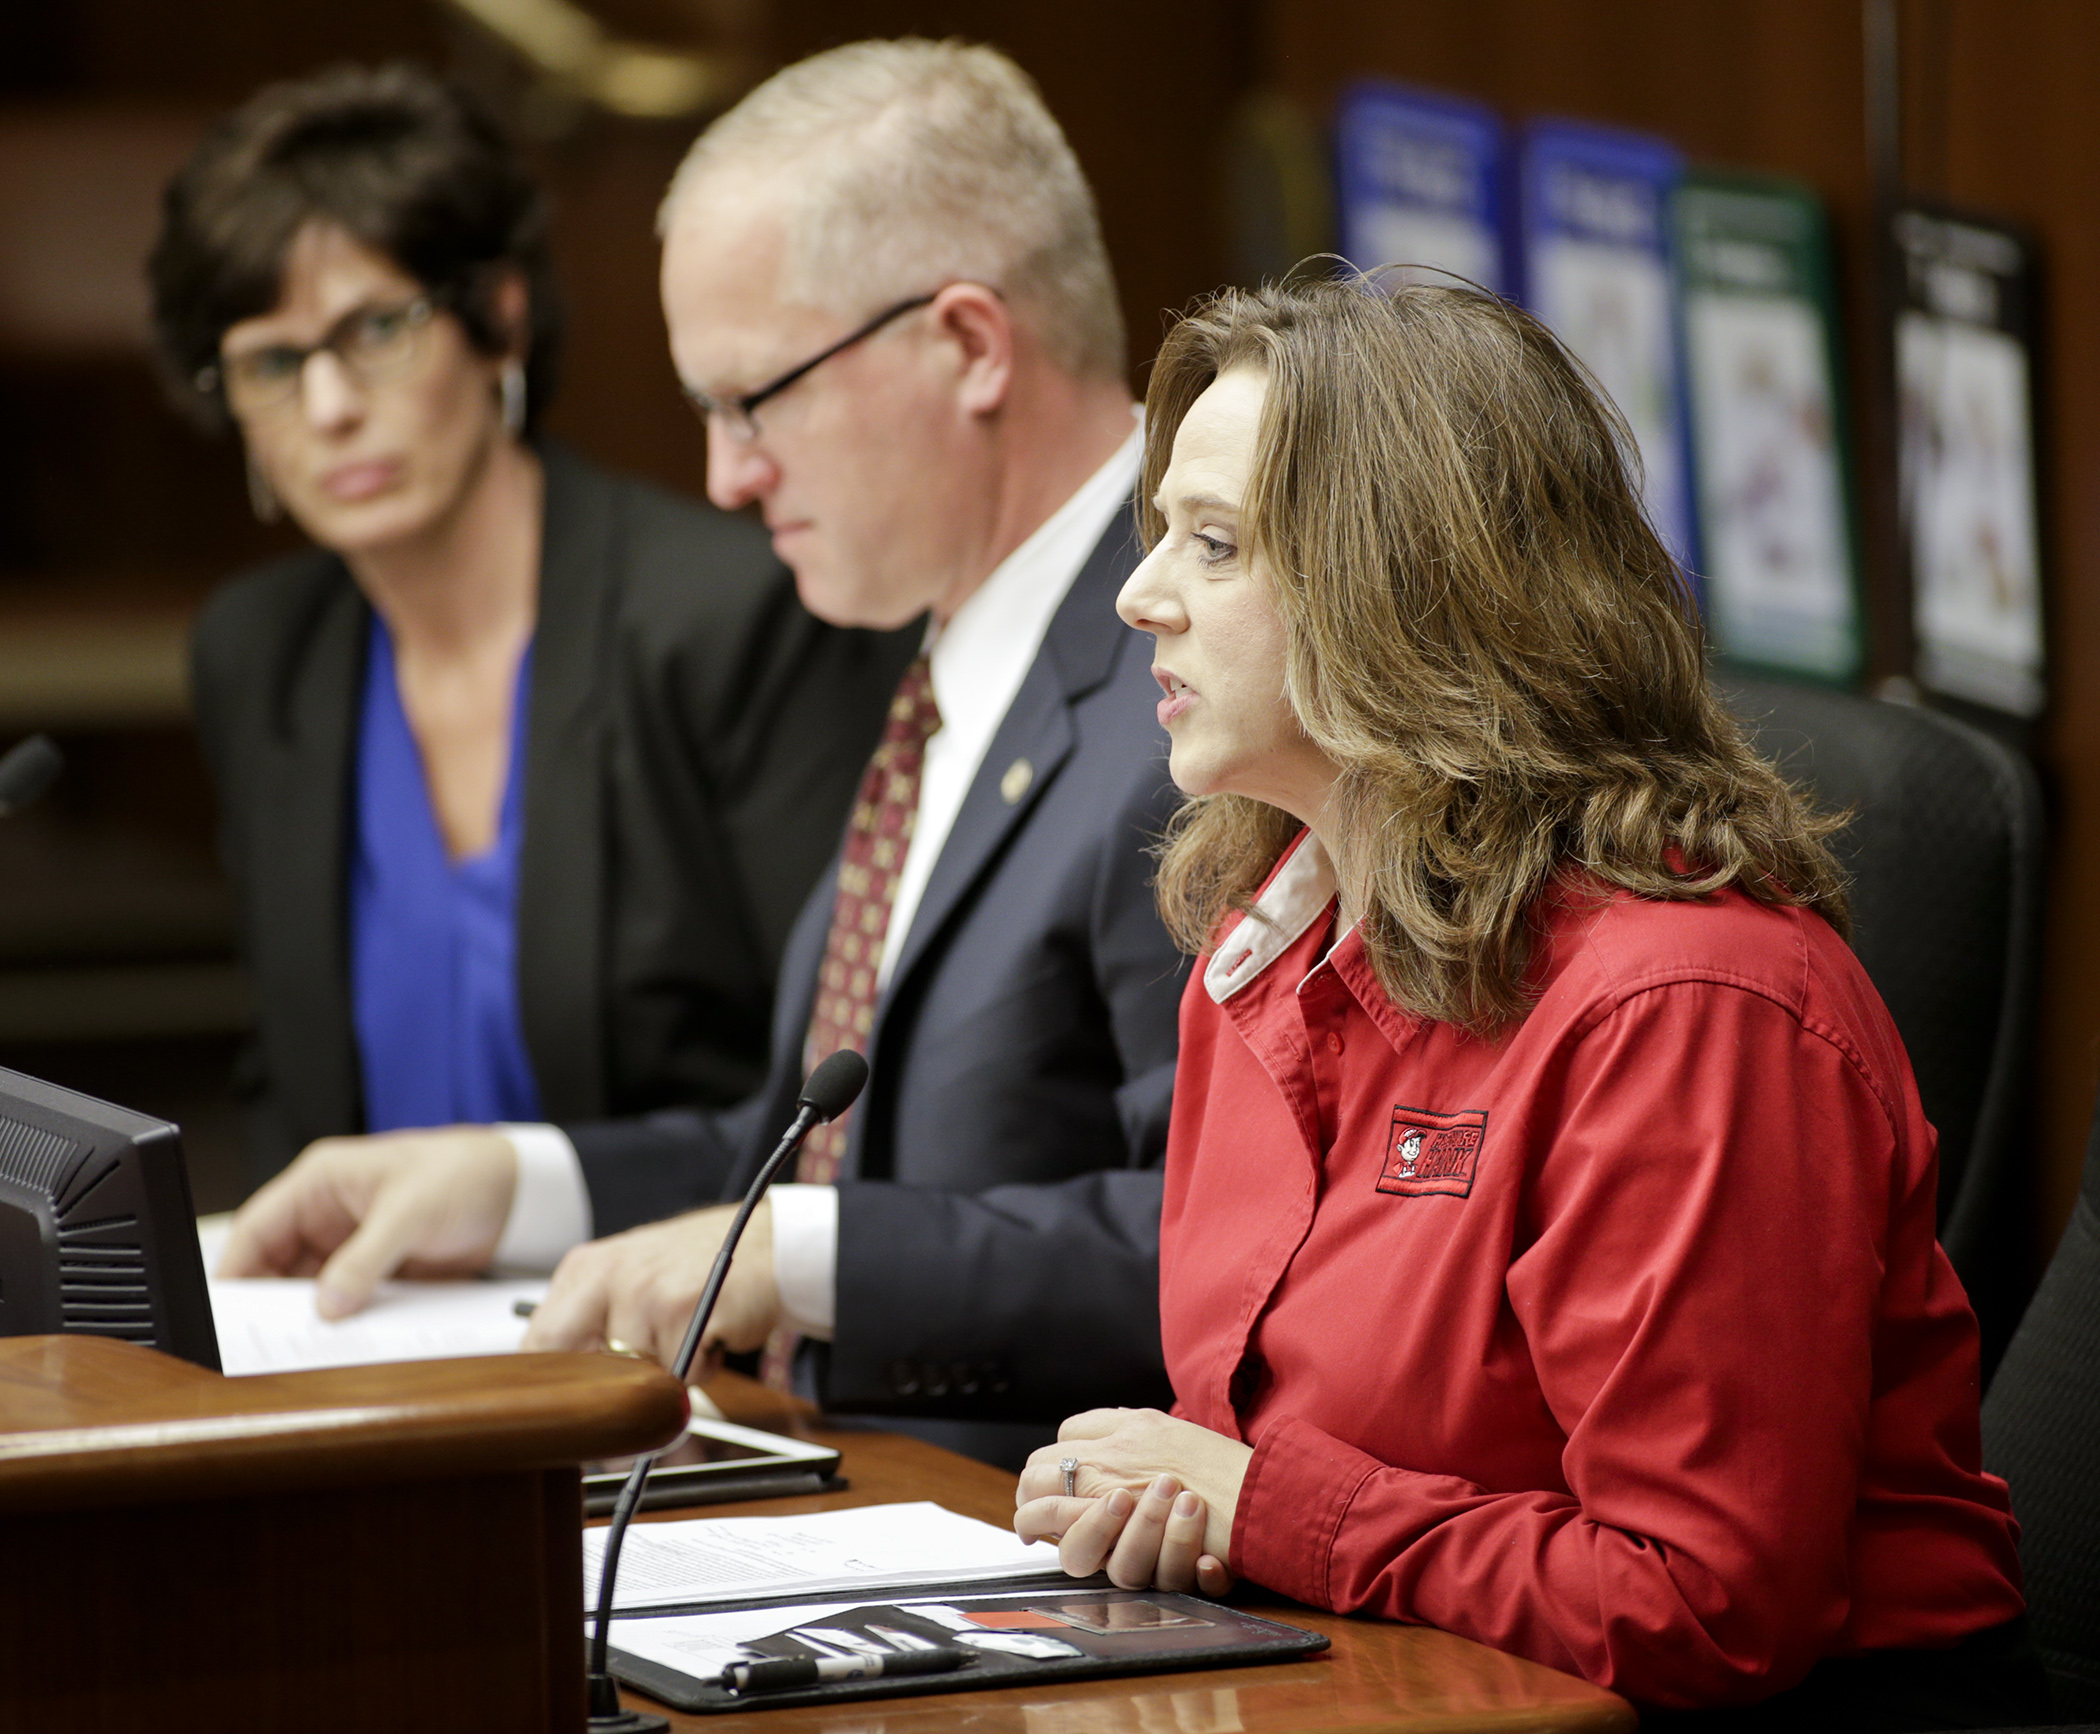 Deborah Everson, co-owner of Everson’s Hardware Hank in Waconia, testifies before the House Taxes Committee Jan. 19 in favor of HF186, sponsored by Rep. Jim Nash, center, which would provide an allowance for those collecting and remitting sales tax. At left is Rep. Barb Haley. Photo by Paul Battaglia